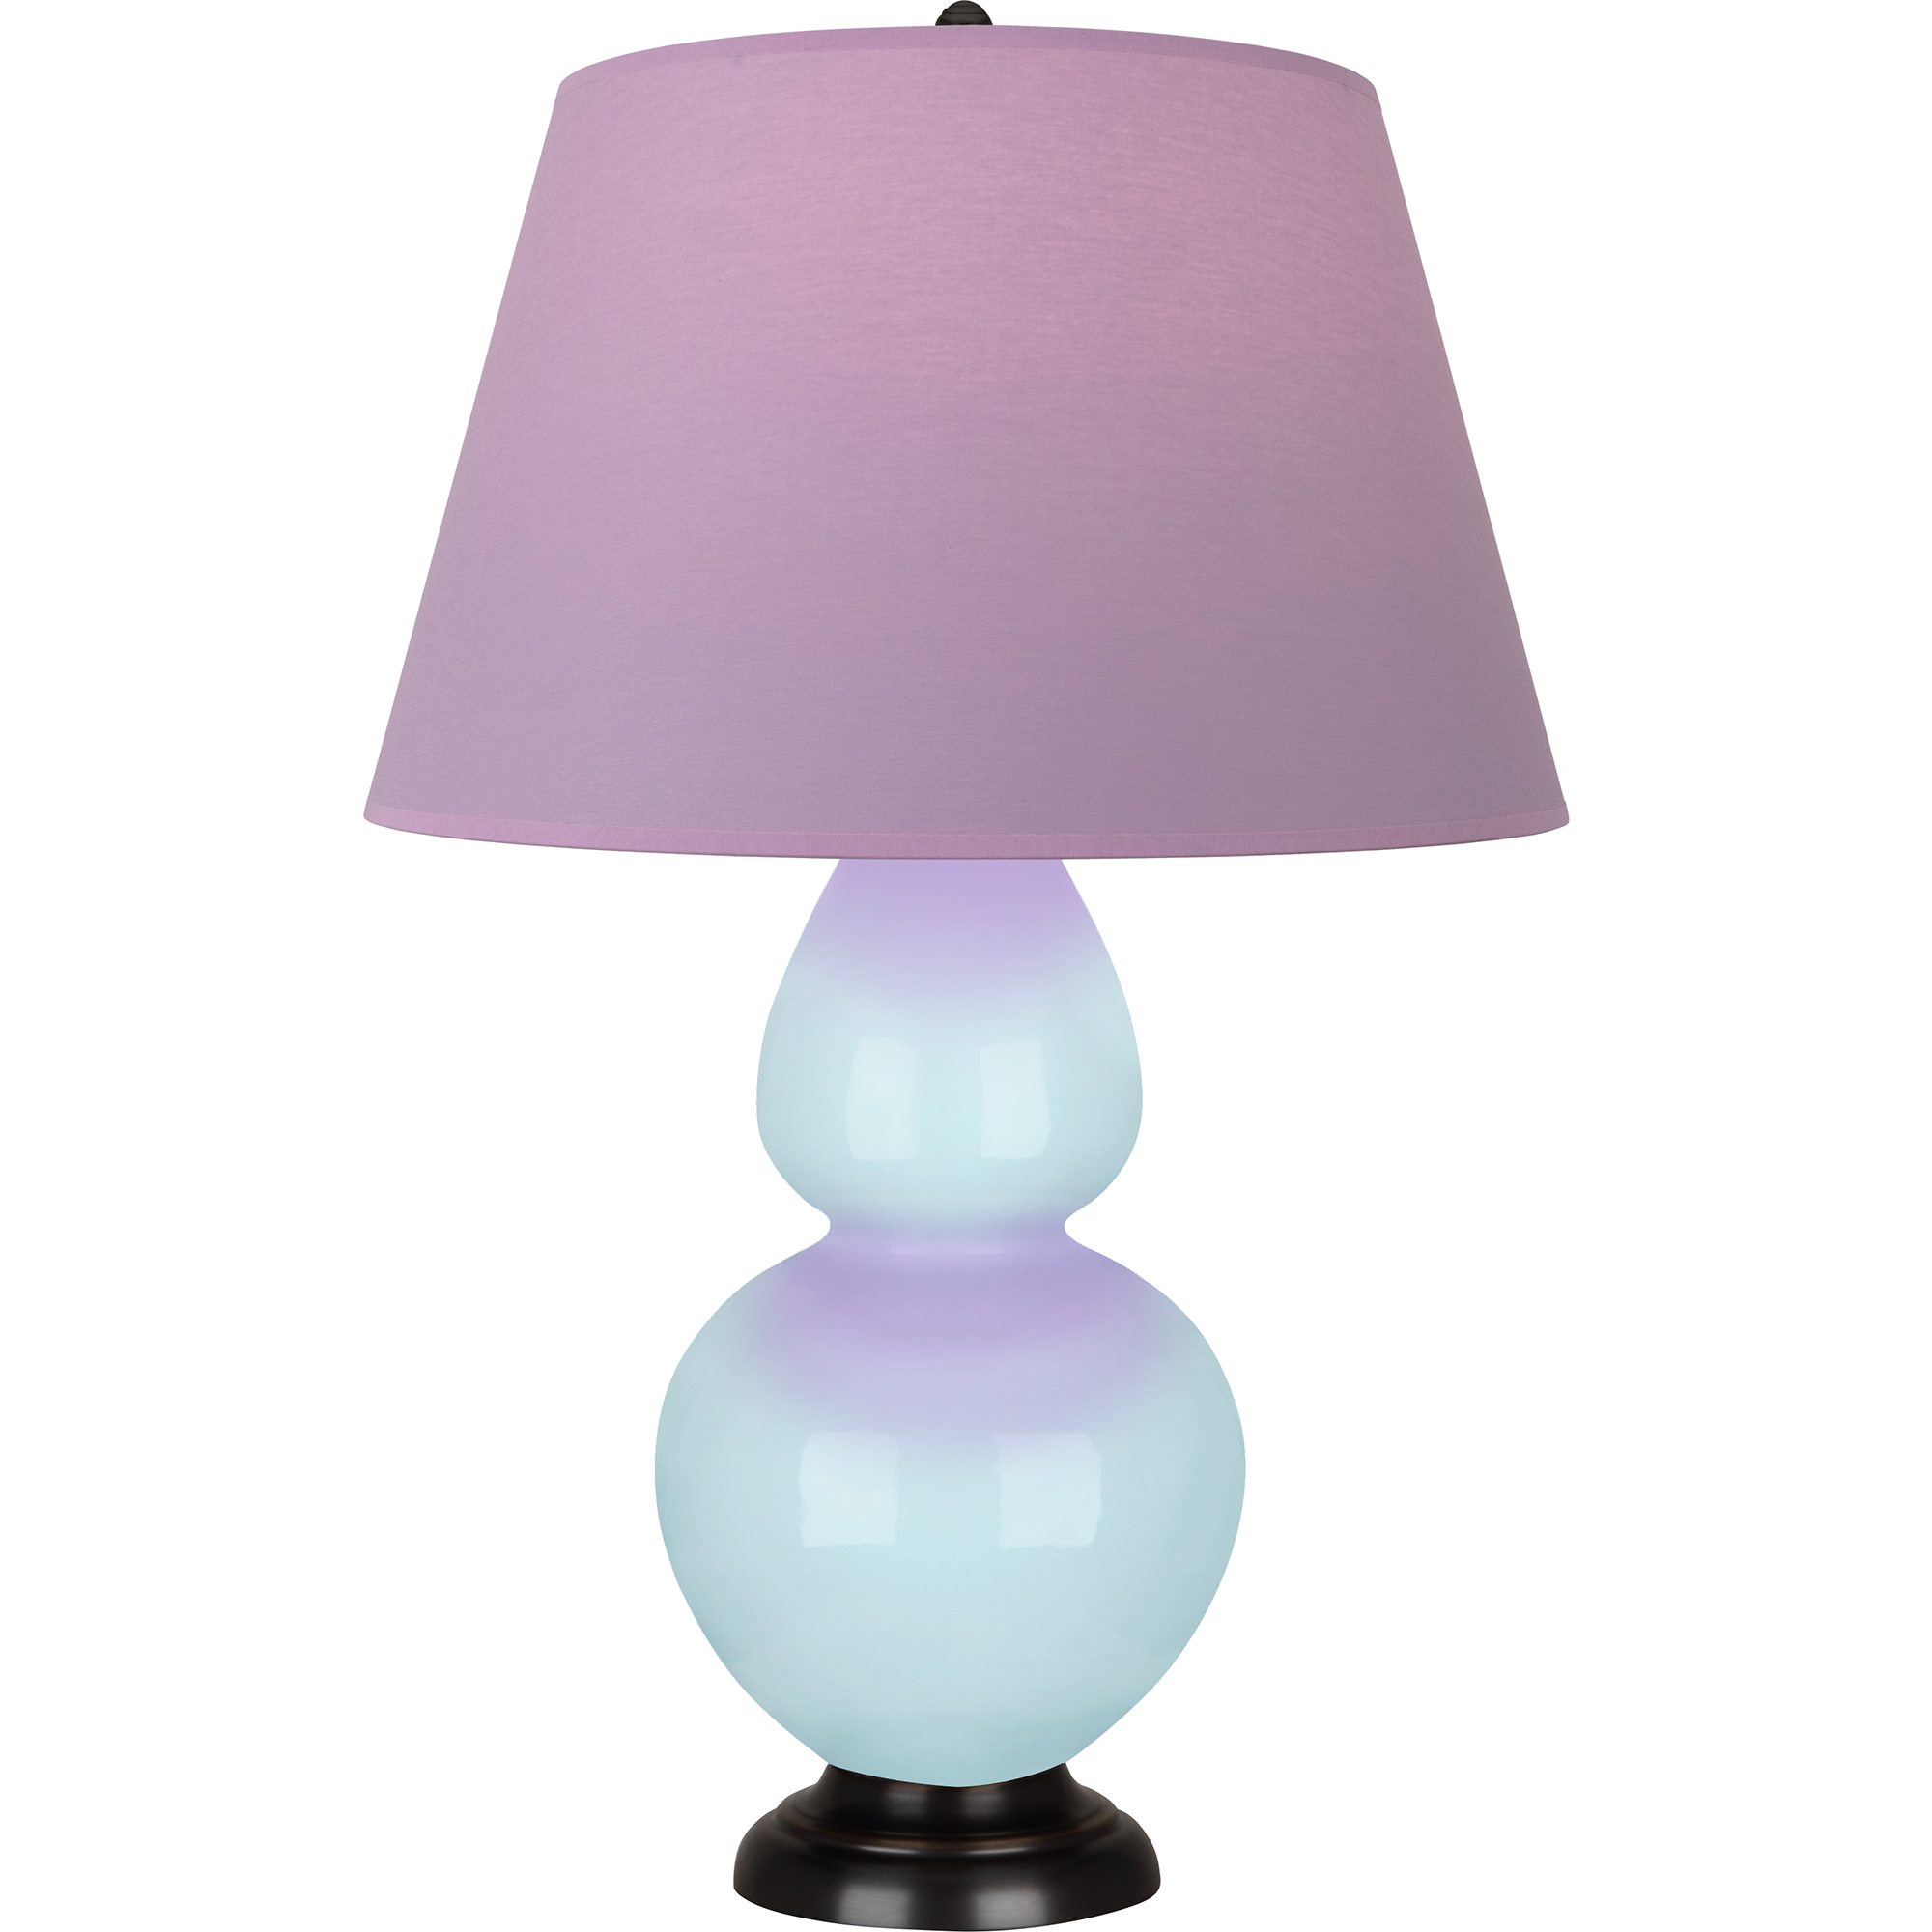 Double Gourd Table Lamp Style #1646L